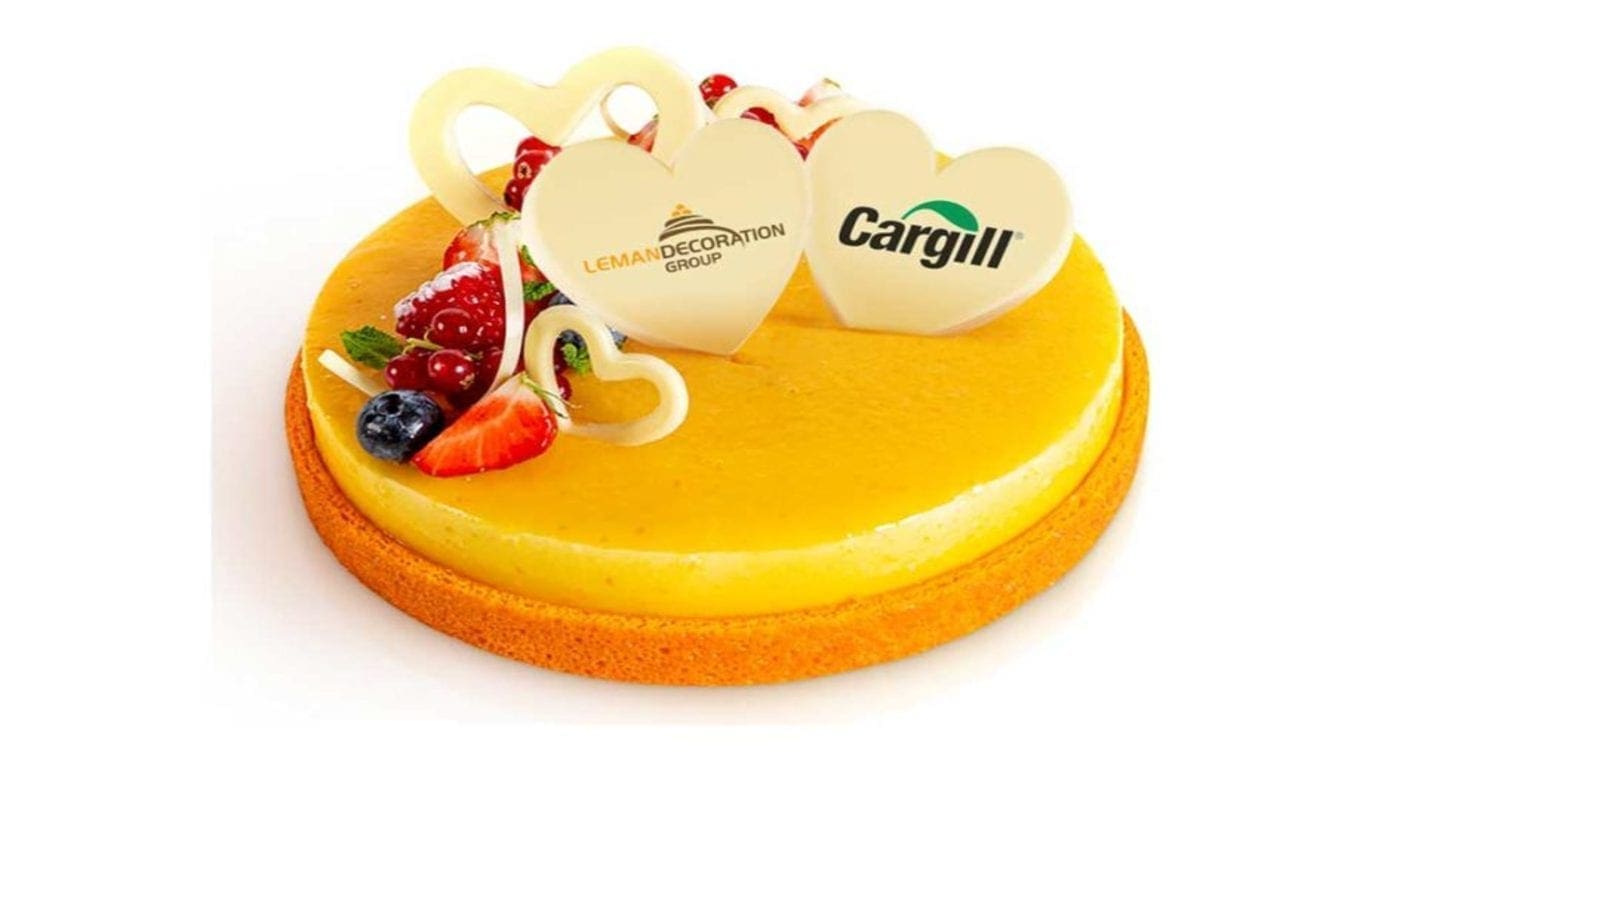 Cargill acquires Leman Decoration to expand gourmet chocolate offerings